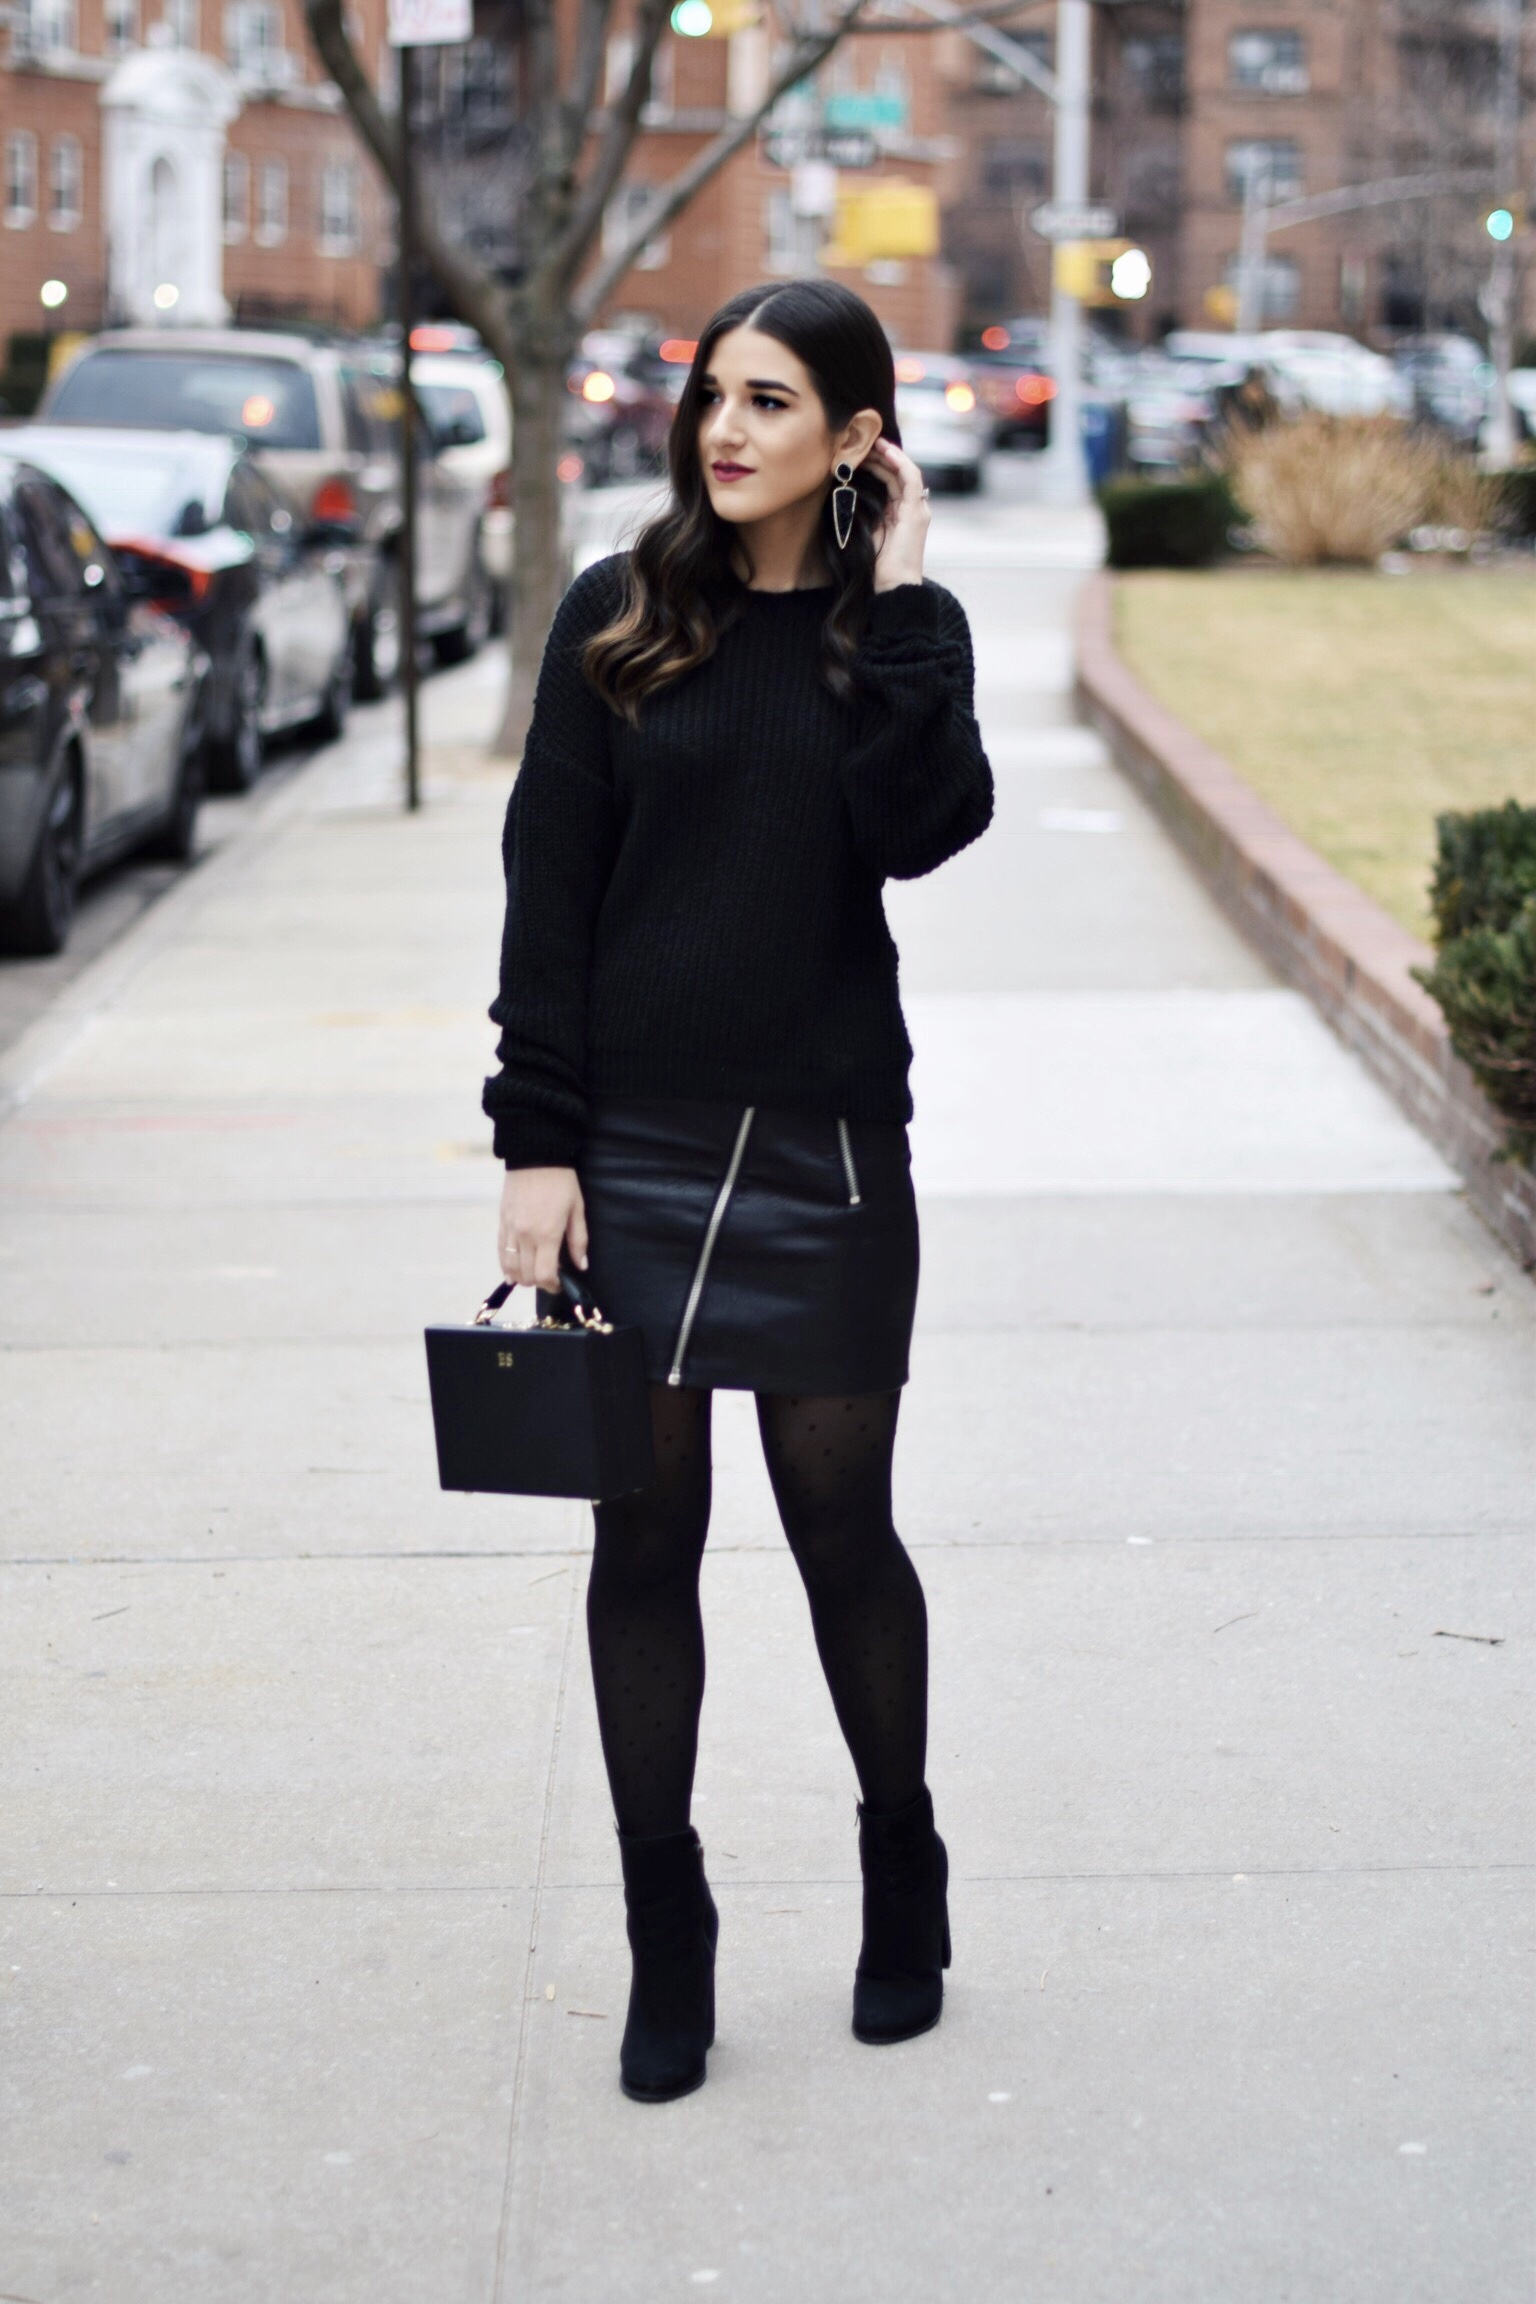 All Black Look 5 Ways To Keep Your New Year's Resolution Going Strong Esther Santer Fashion Blog NYC Street Style Blogger Outfit OOTD Trendy BaubleBar Earrings Monogrammed Box Bag  Daily Edited Girl Women Booties Pleather Mini Skirt Polka Dot Tights.jpg